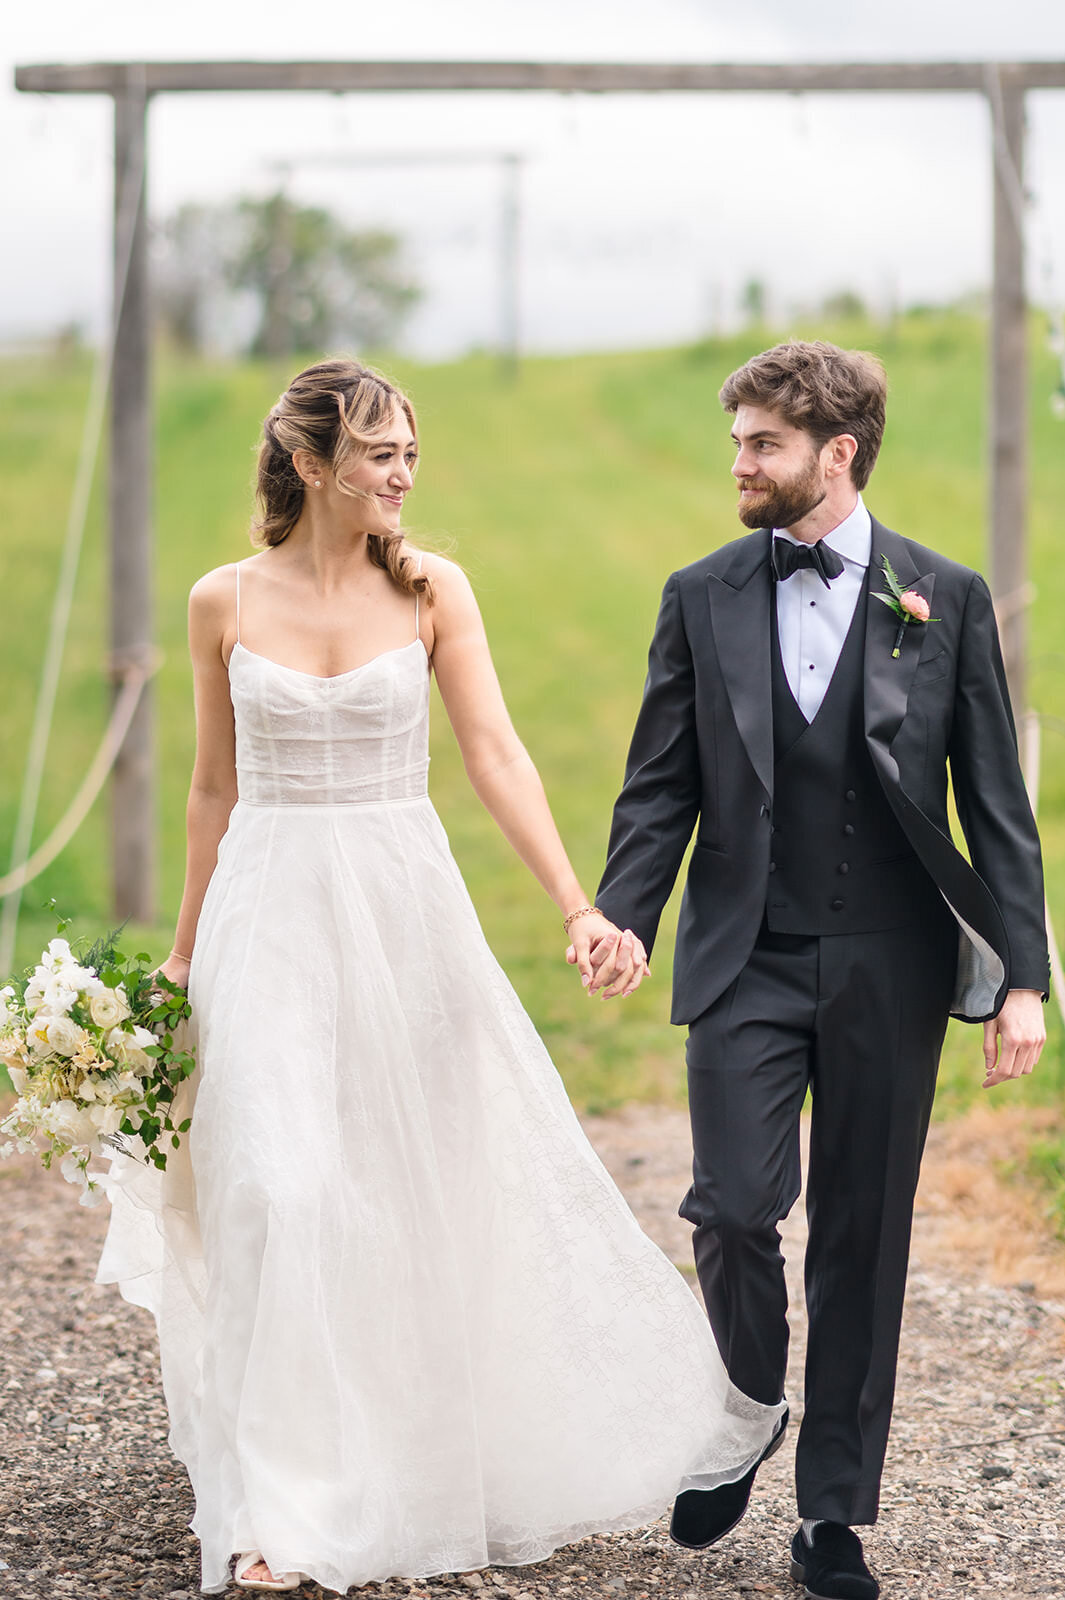 A bride in an elegant white gown and a groom in a sharp black tuxedo hold hands and smile at each other, walking under a rustic ski lift on a grassy field